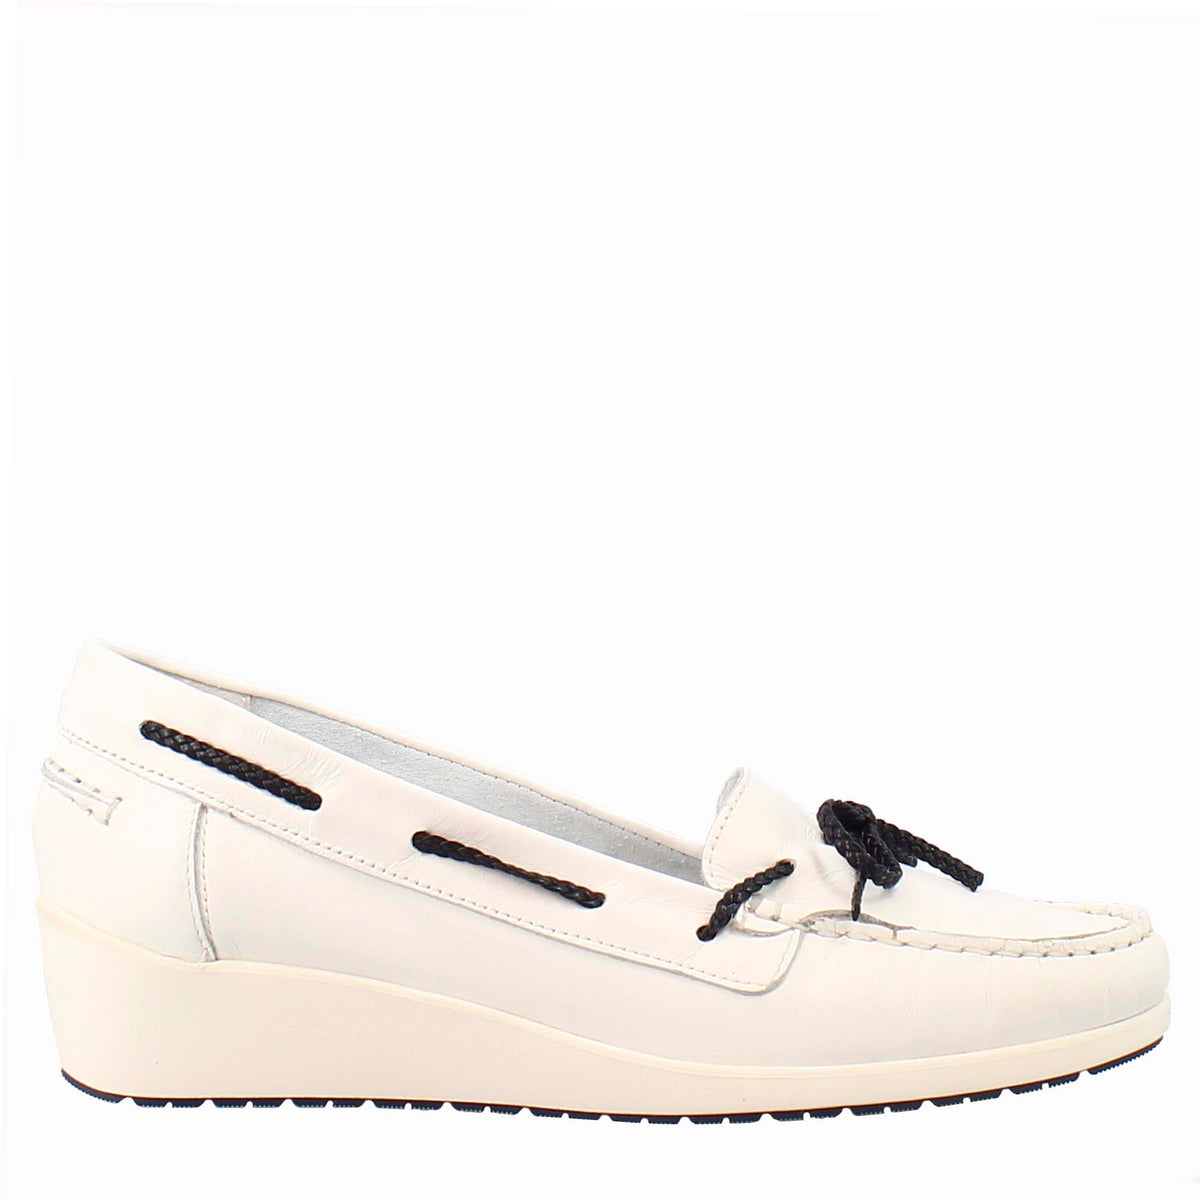 Women's handmade wedge loafers in white leather